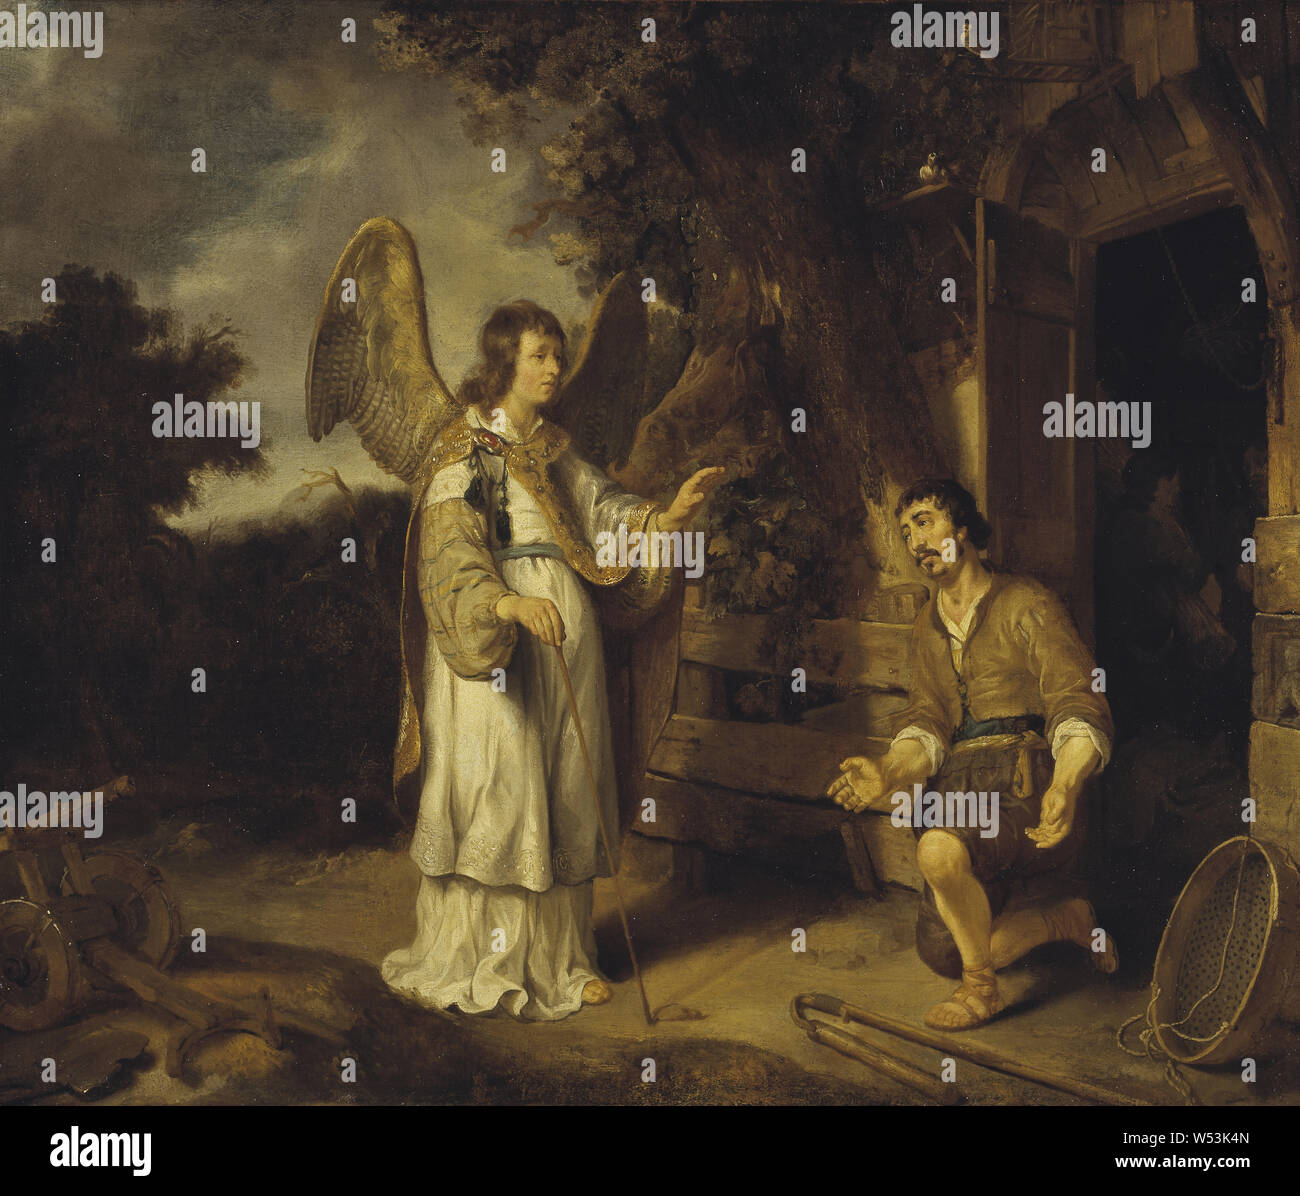 Gerbrand van den Eeckhout, The Angel and Gideon, Angel and Gideon, painting, religious art, 1640, oil on canvas, Height, 64 cm (25.1 inches), Width, 75 cm (29.5 inches), Signed, almost wiped out, dated 1640 Stock Photo